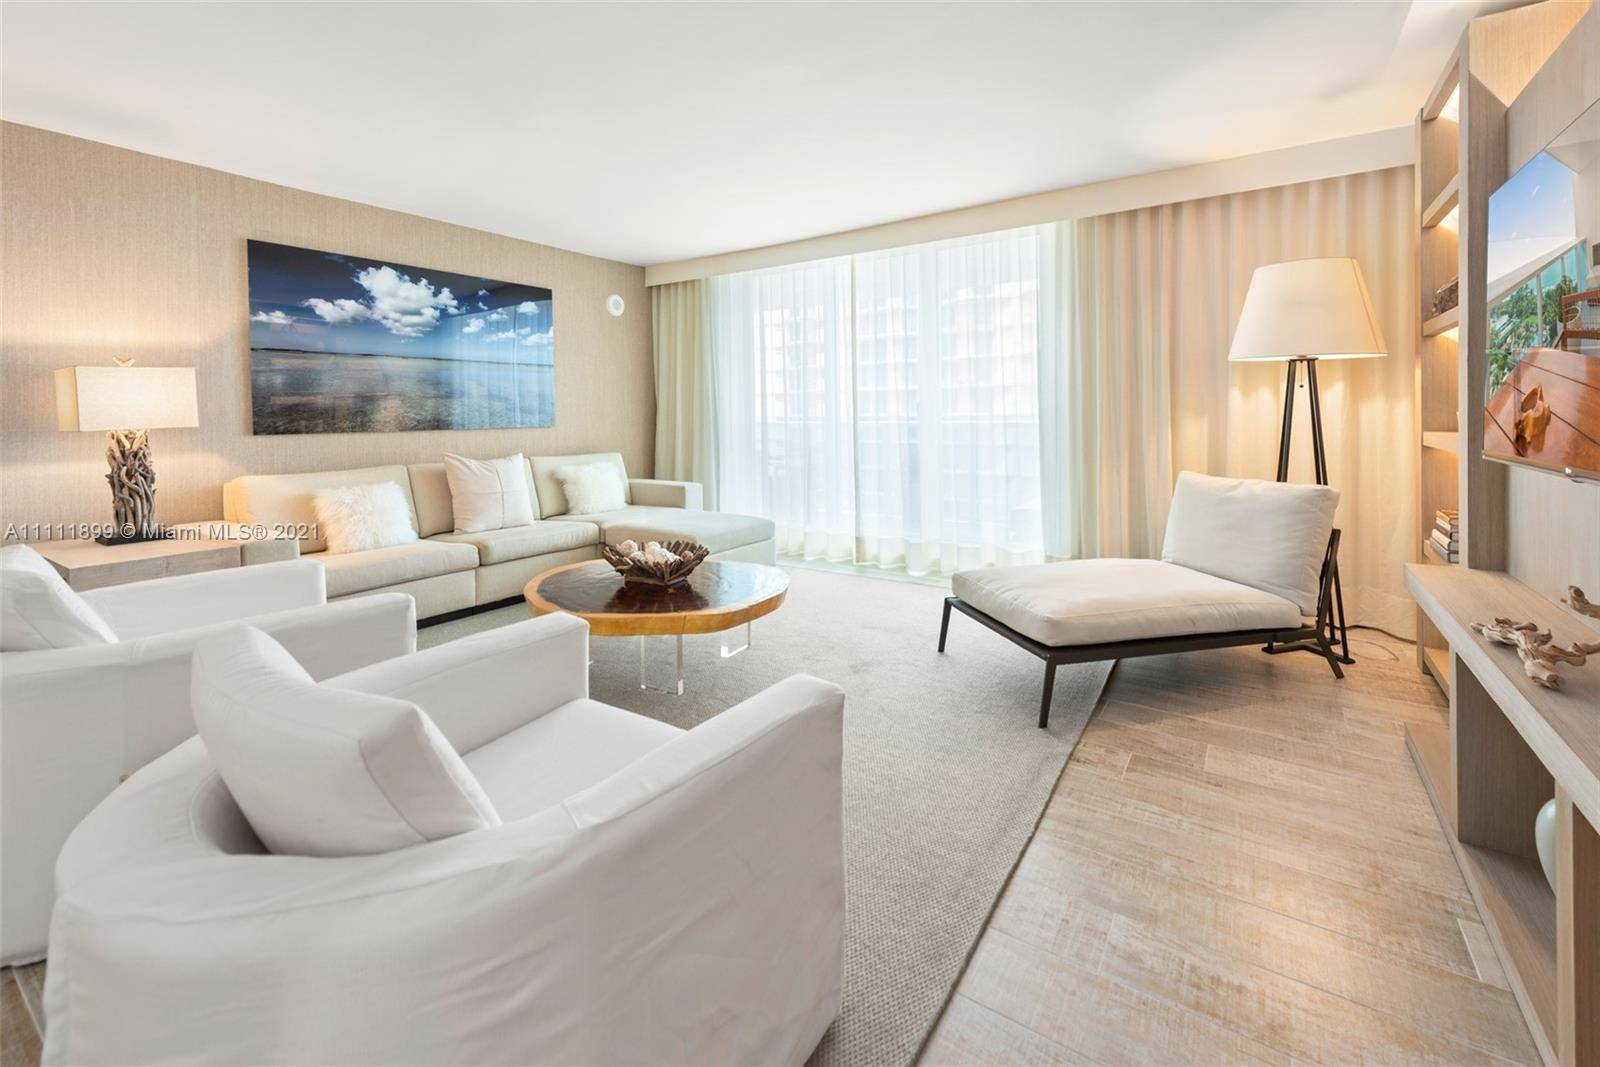 Make yourself at home in this luxury Private Residence, located in Miami s first eco friendly, 1 Hotel Homes.